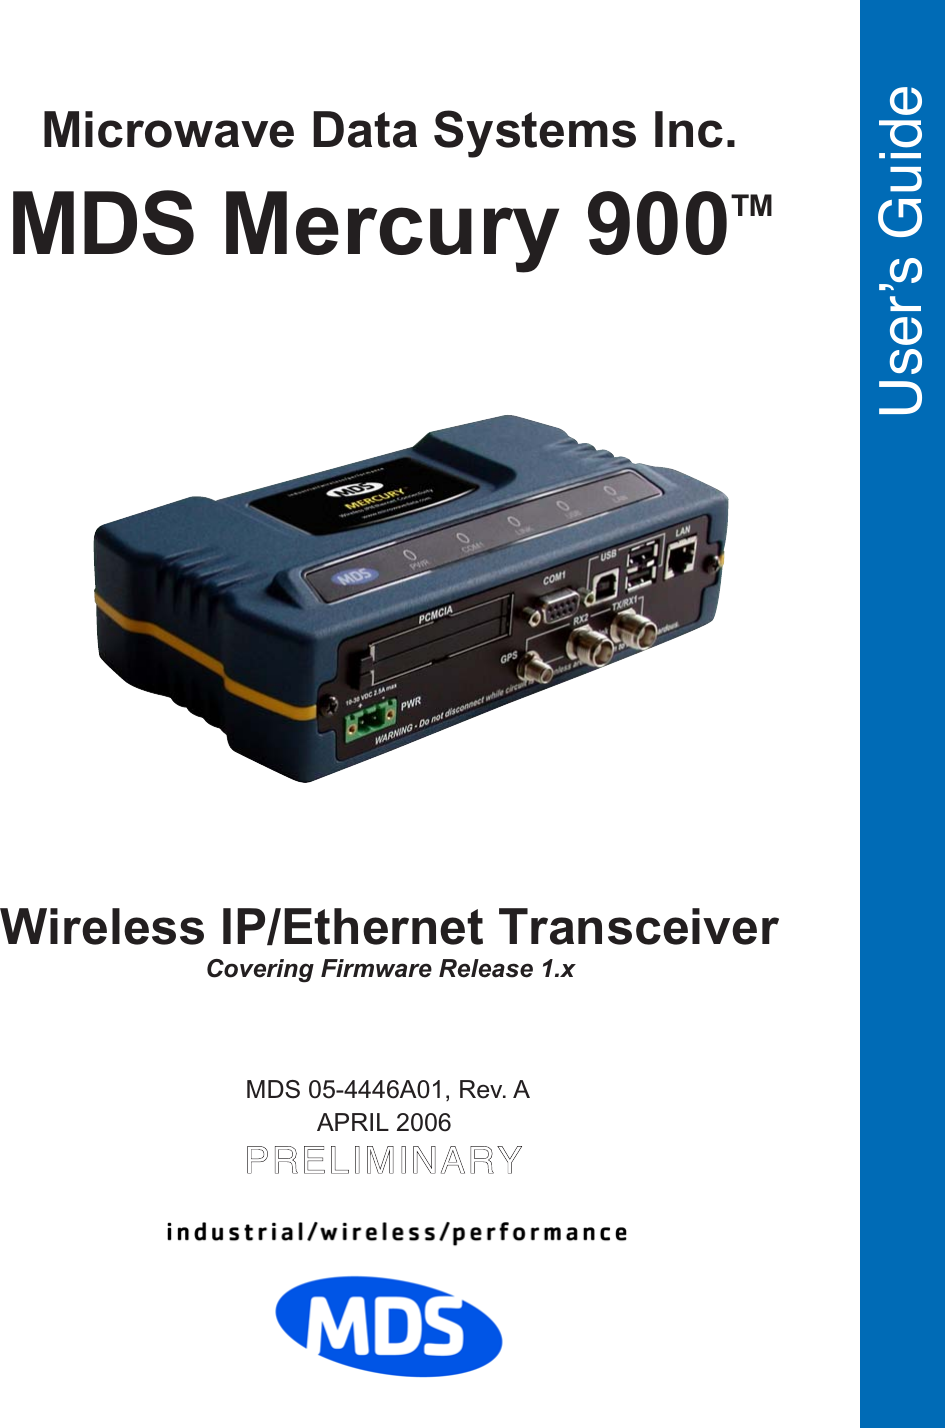  User’s Guide MDS 05-4446A01, Rev. AAPRIL 2006PRELIMINARYWireless IP/Ethernet TransceiverCovering Firmware Release 1.xMDS Mercury 900TMMicrowave Data Systems Inc. 